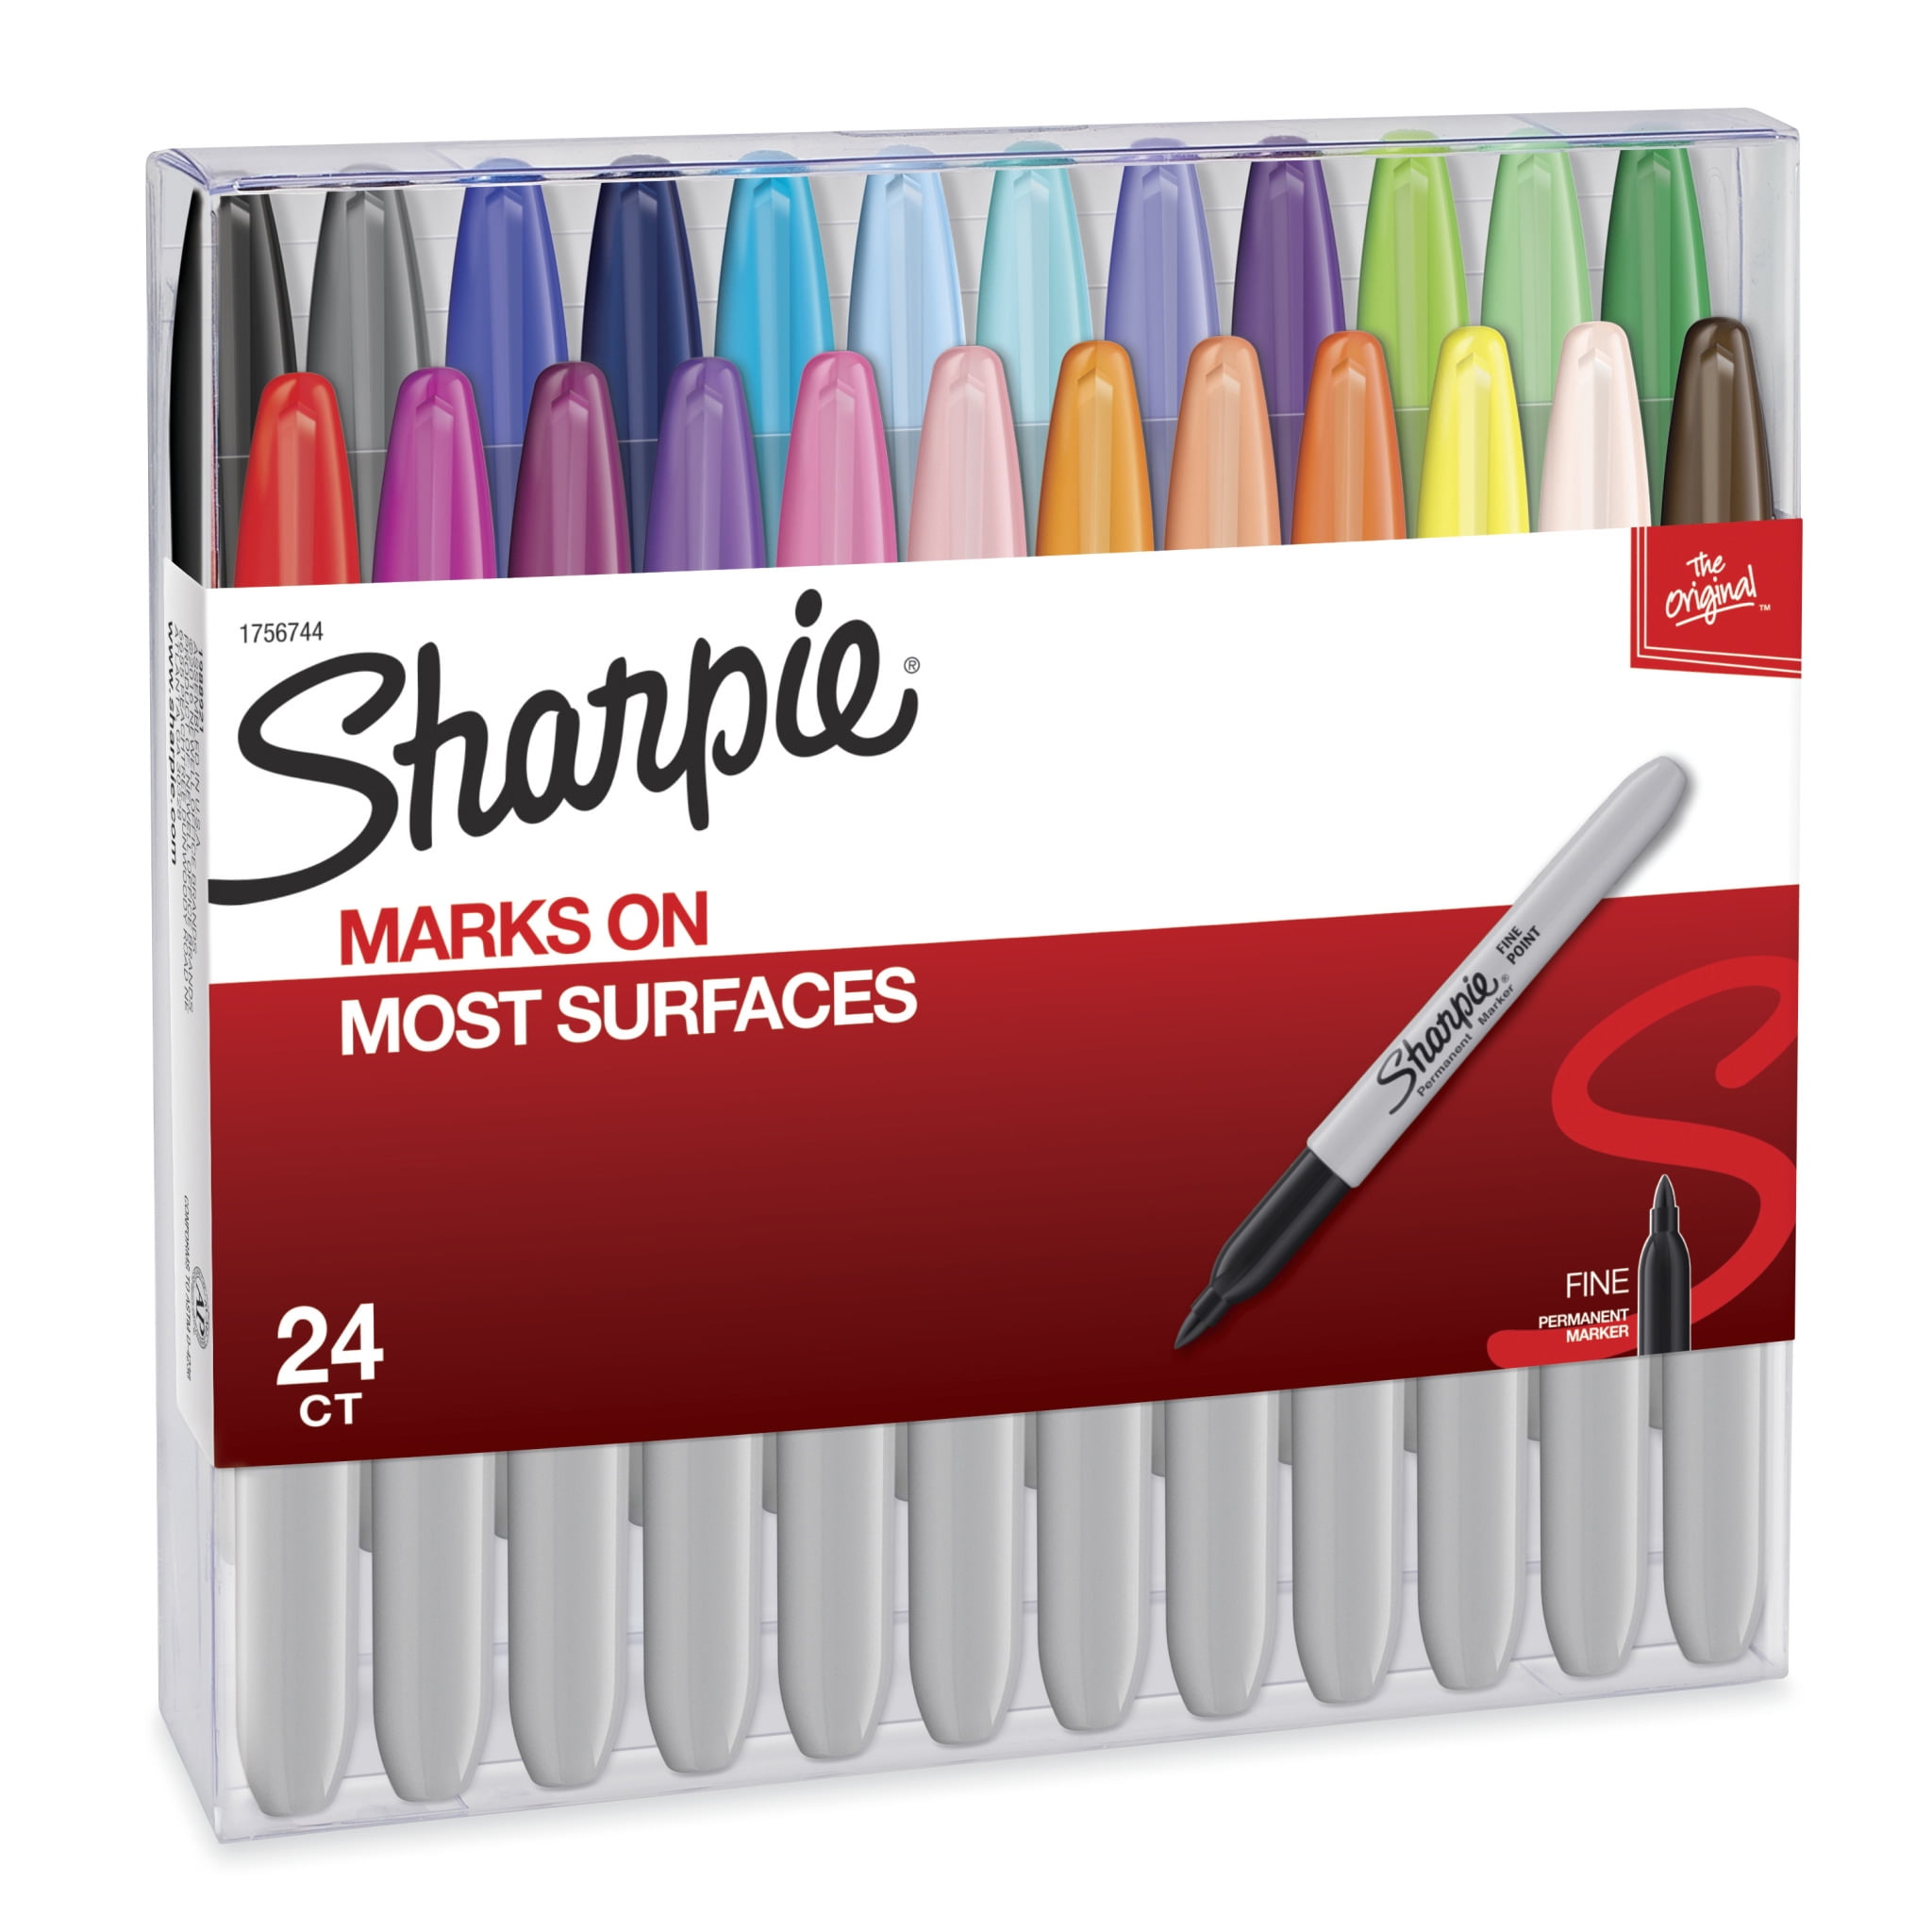 Sharpie Fine Point Assorted Colors Permanent Marker - 24 ct